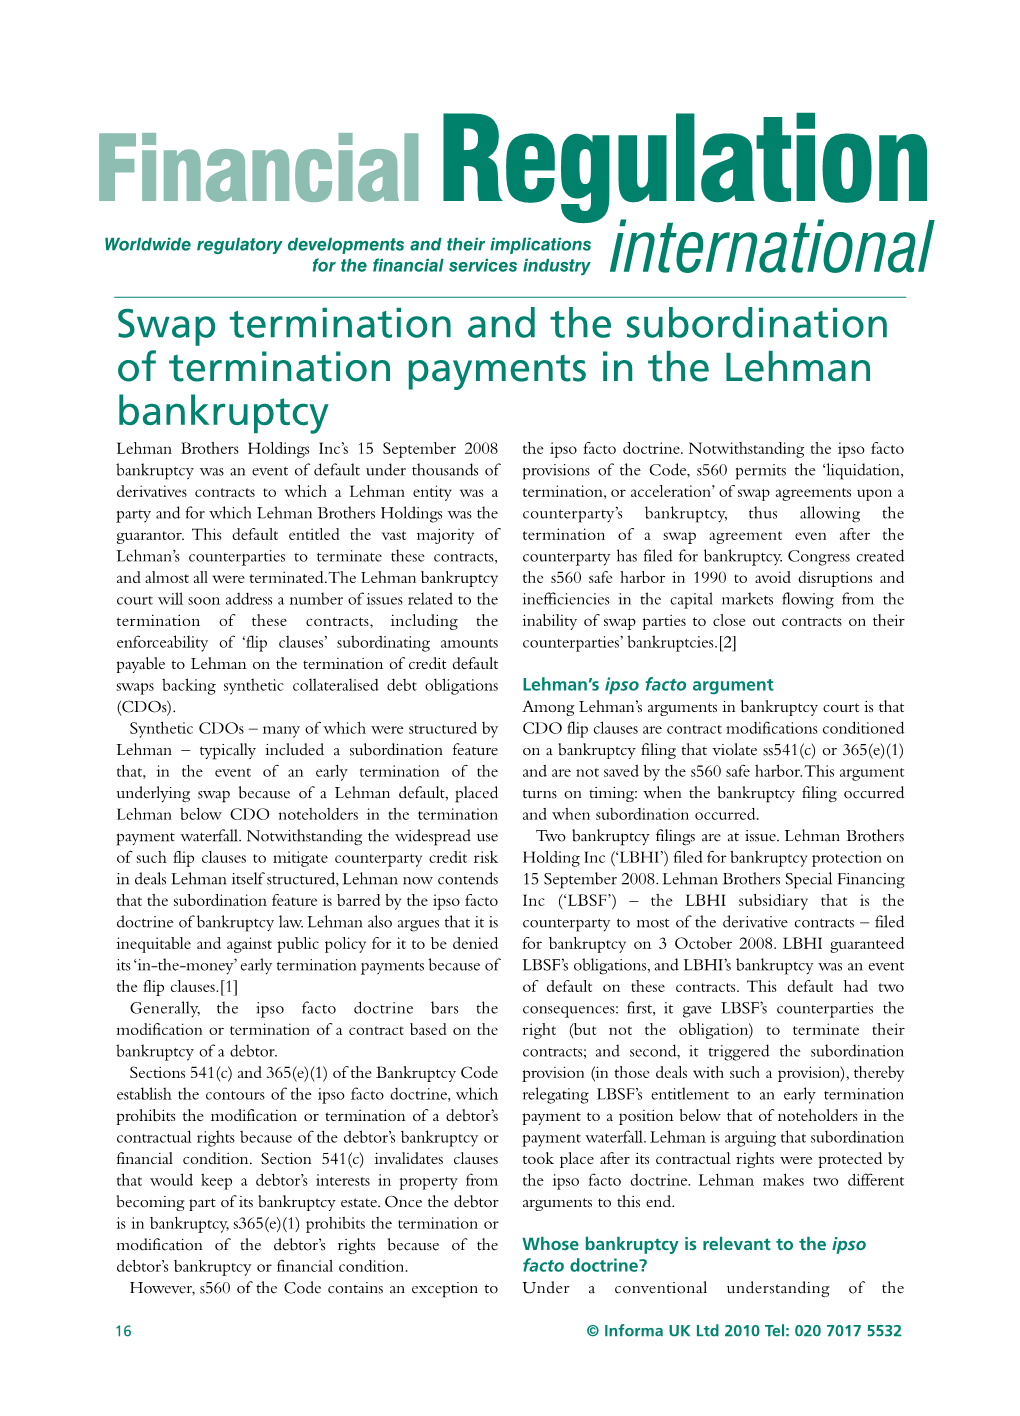 Swap Termination and the Subordination of Termination Payments in the Lehman Bankruptcy Lehman Brothers Holdings Inc’S 15 September 2008 the Ipso Facto Doctrine